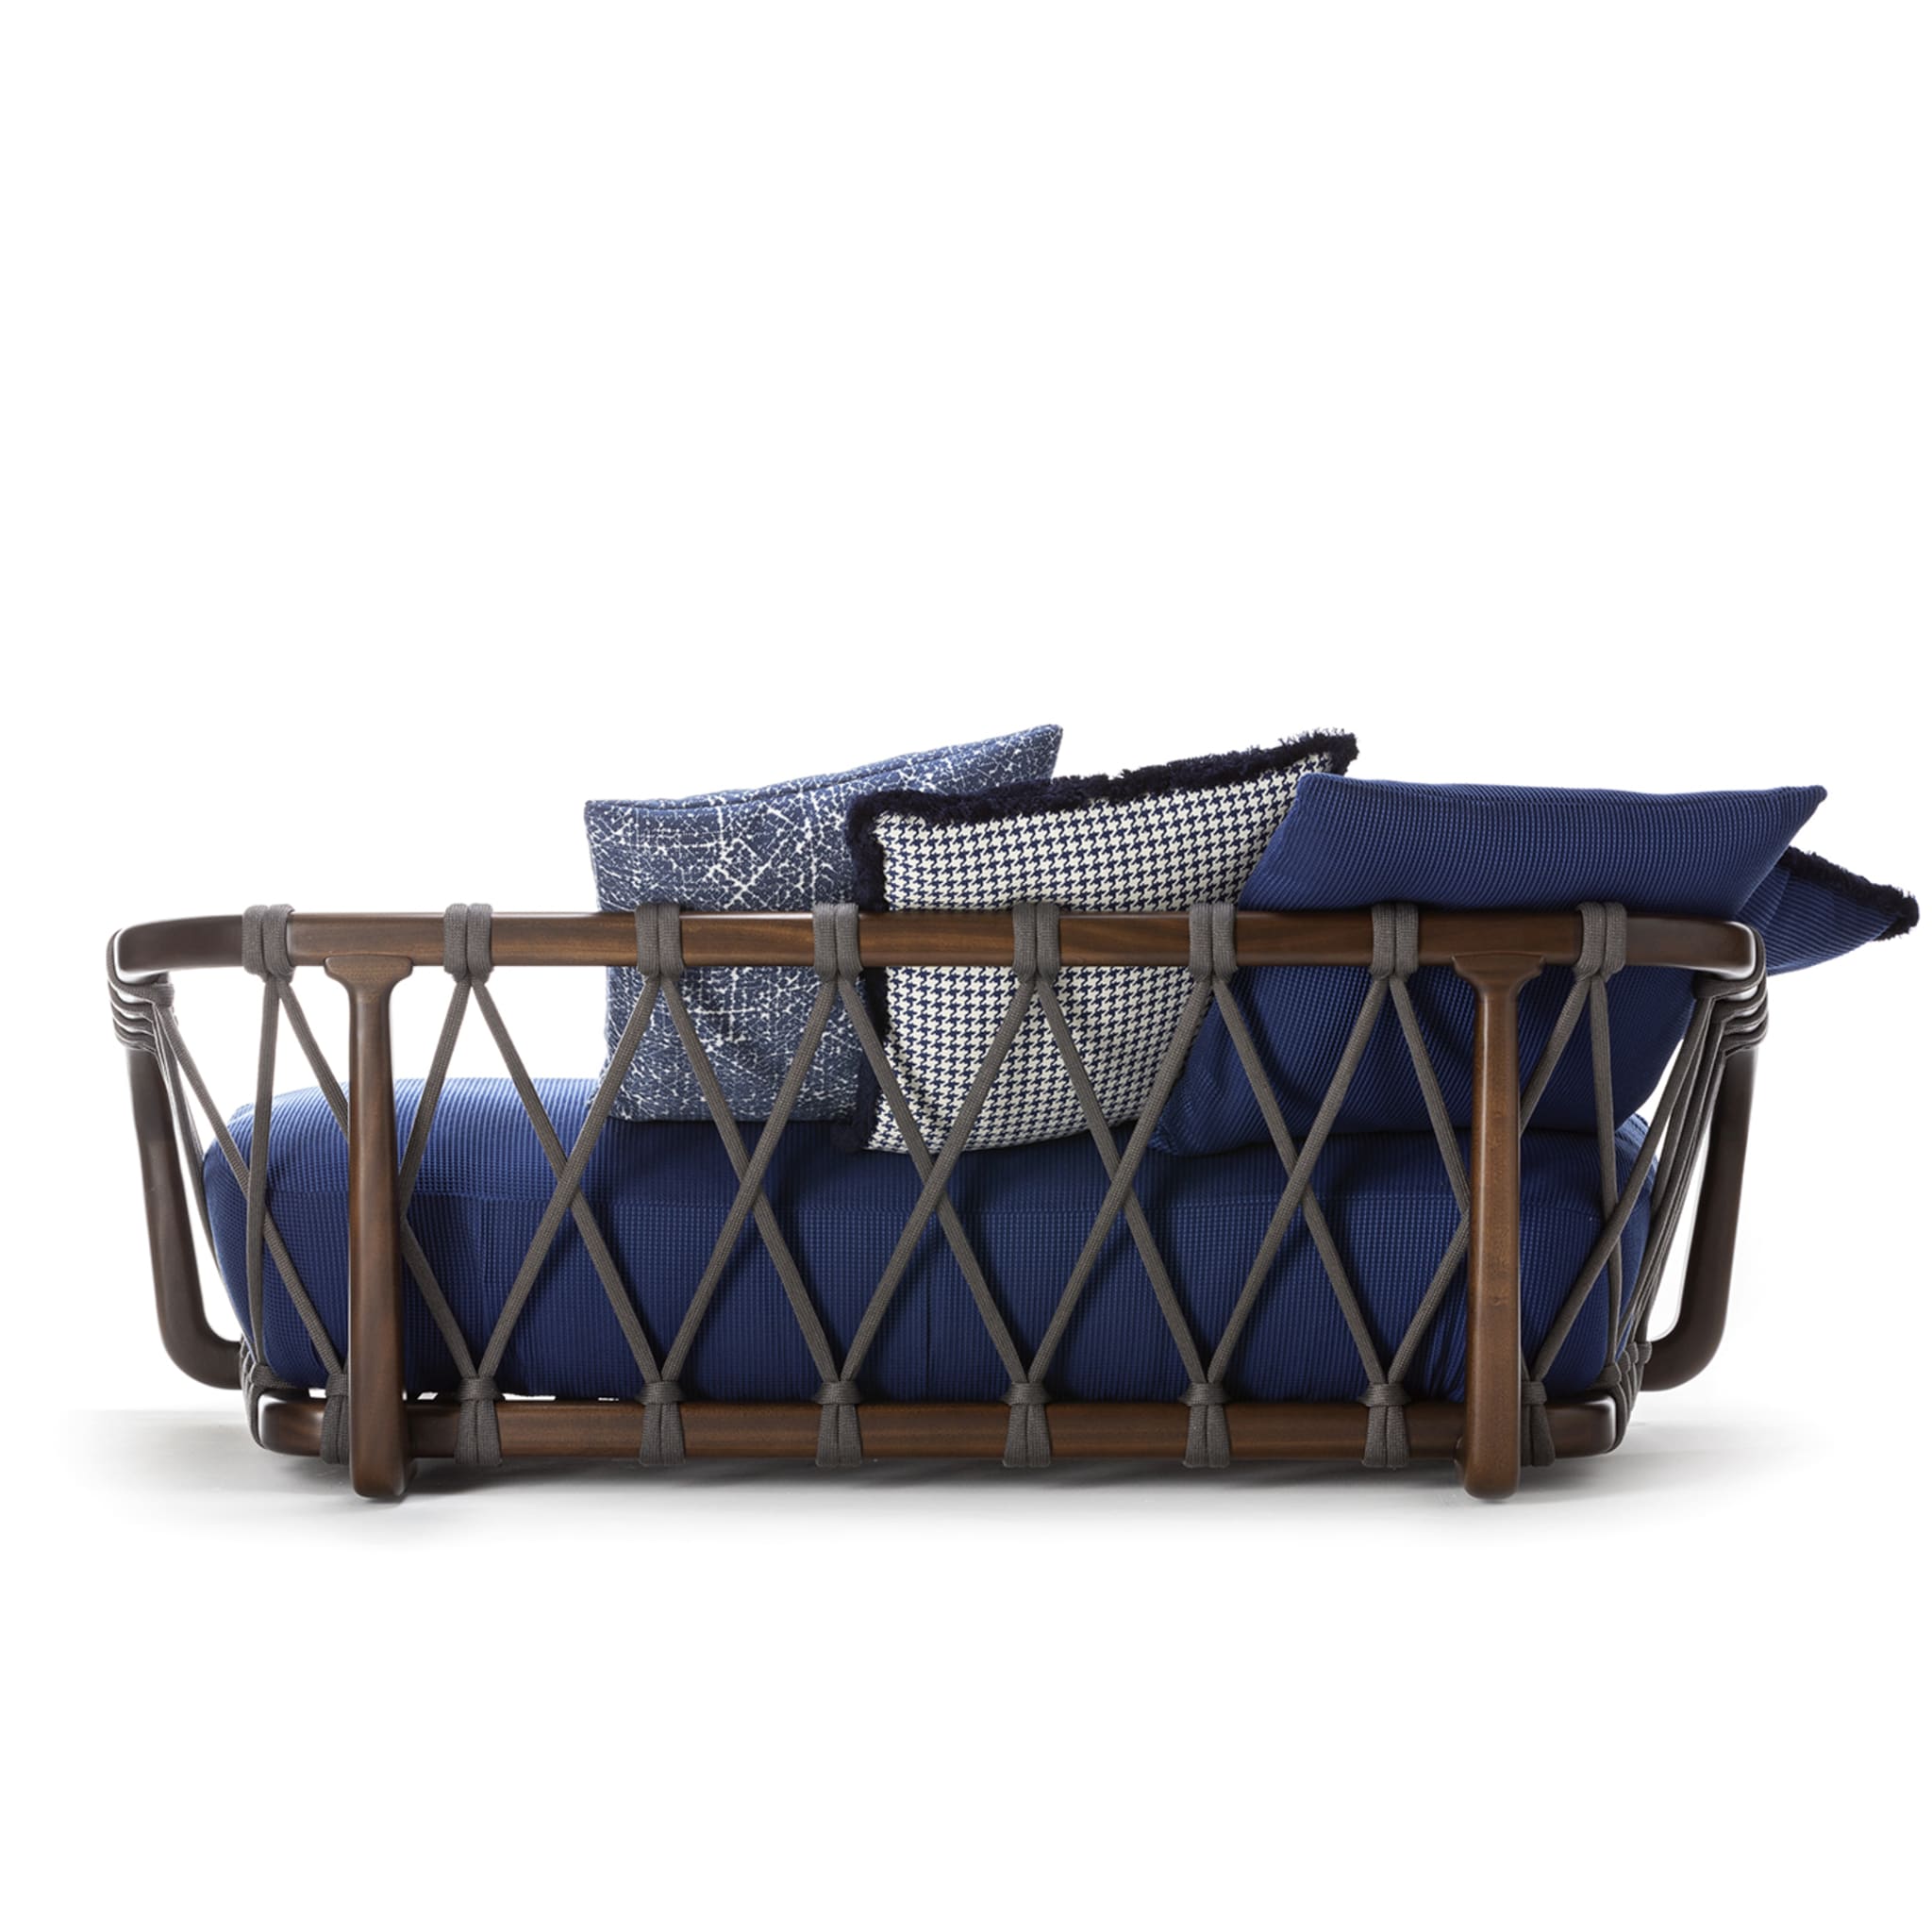 Sunset Basket Sofa 215 by Paola Navone - Alternative view 5